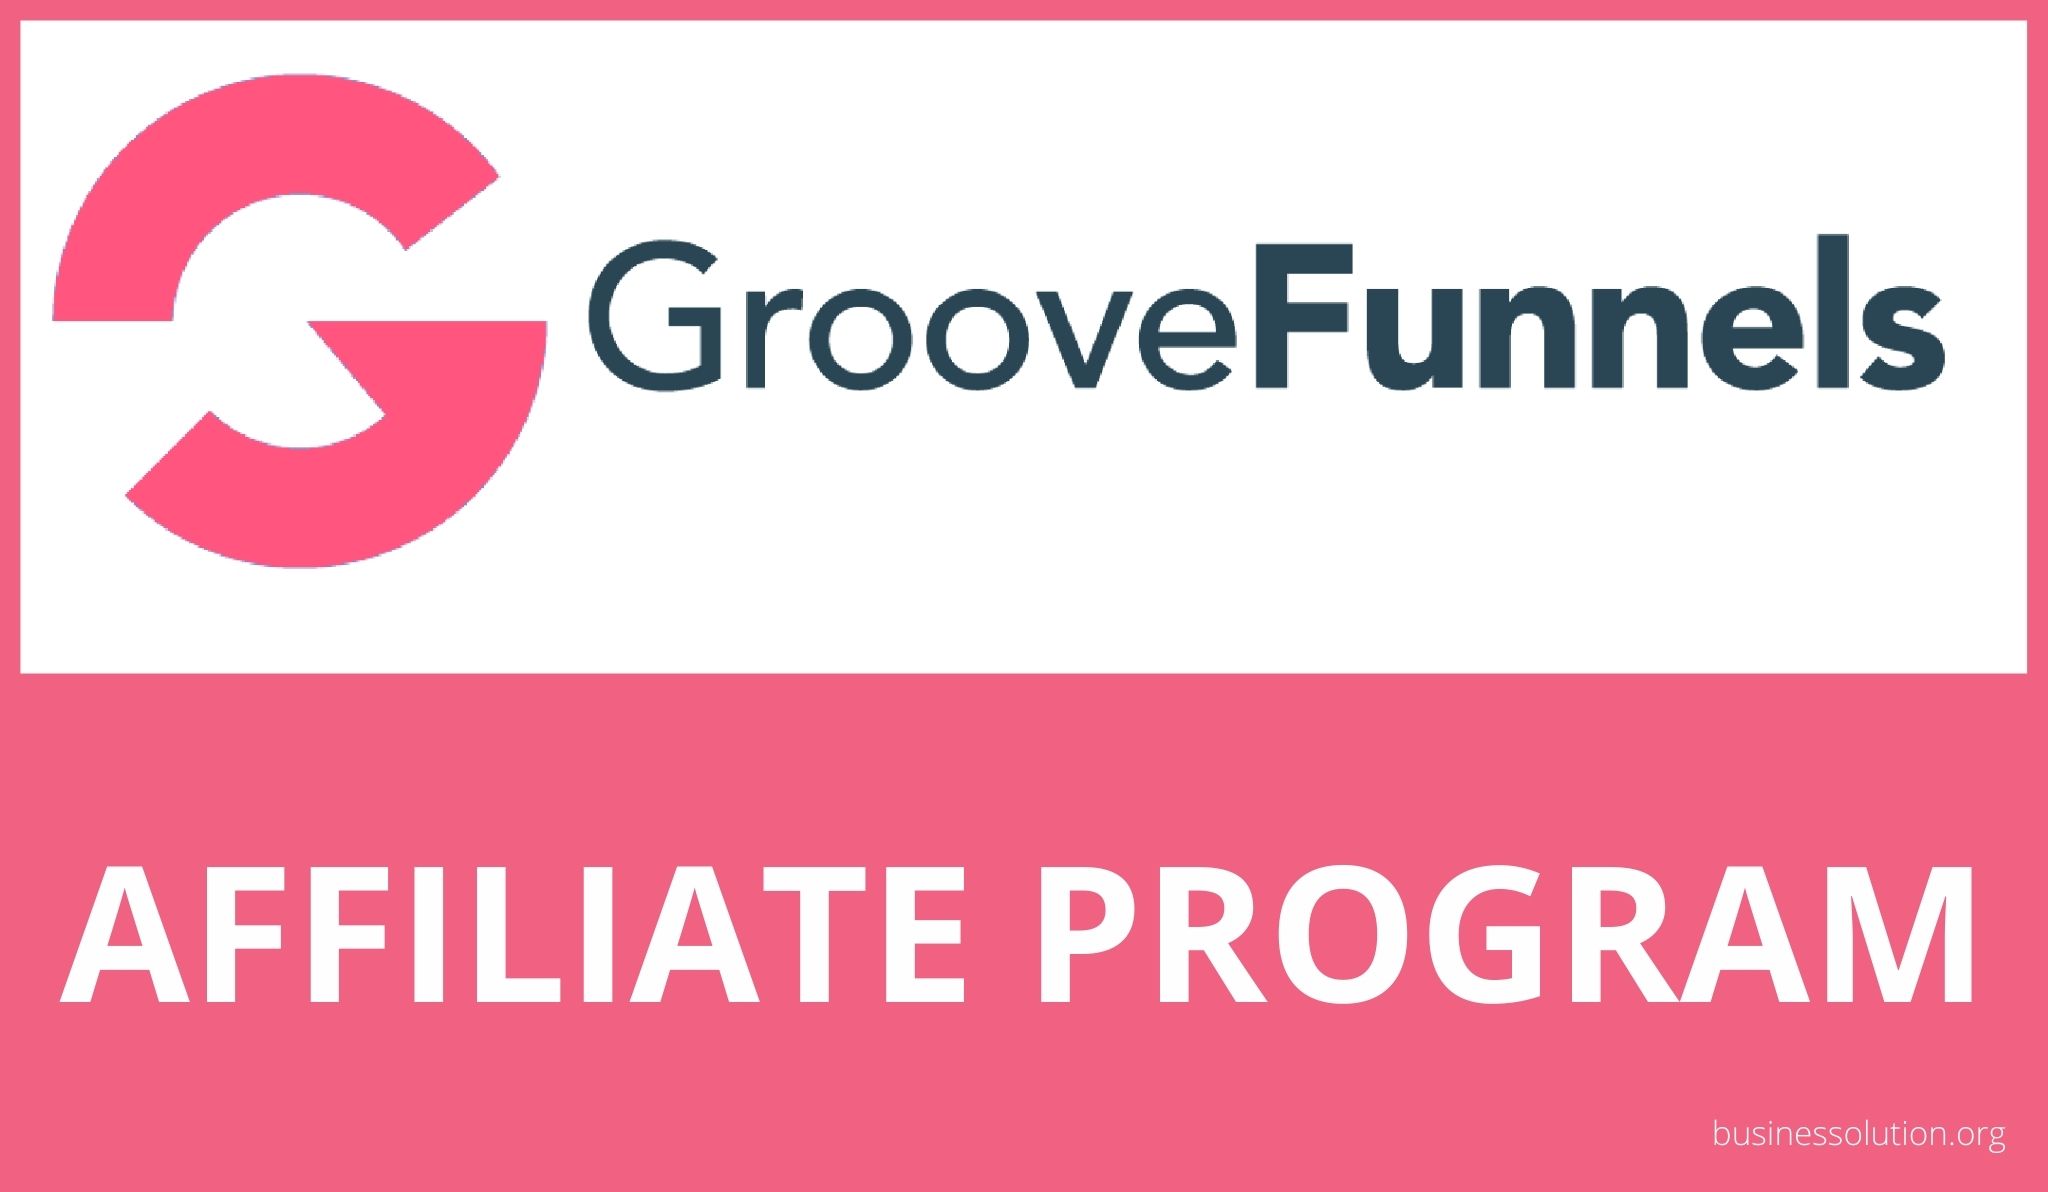 groovefunnels logo free - Your Certified Marketing Experts